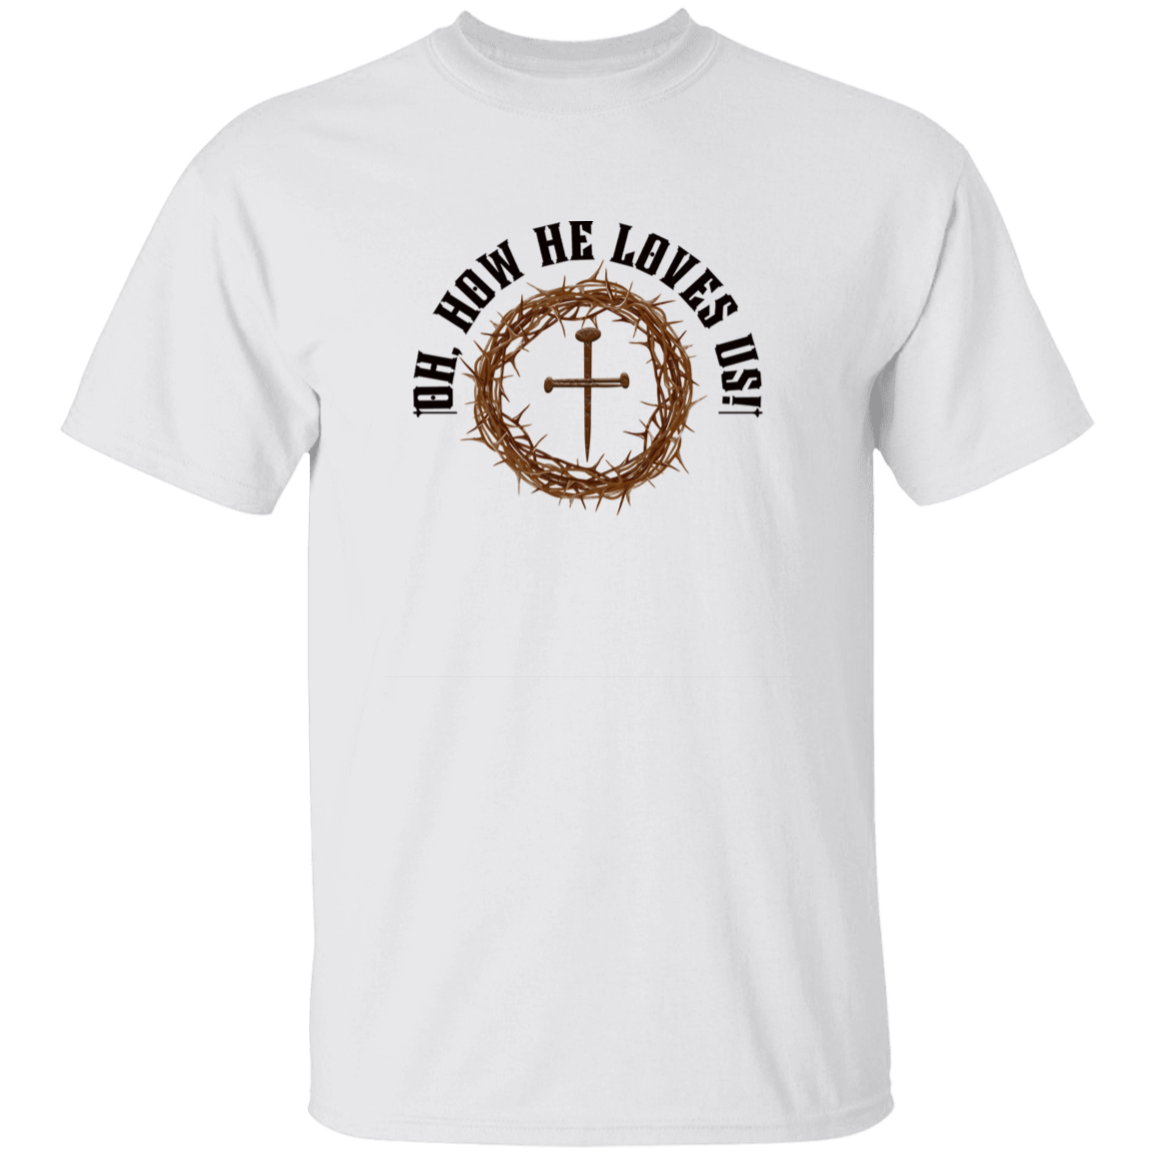 Oh How He Loves Us T-Shirt